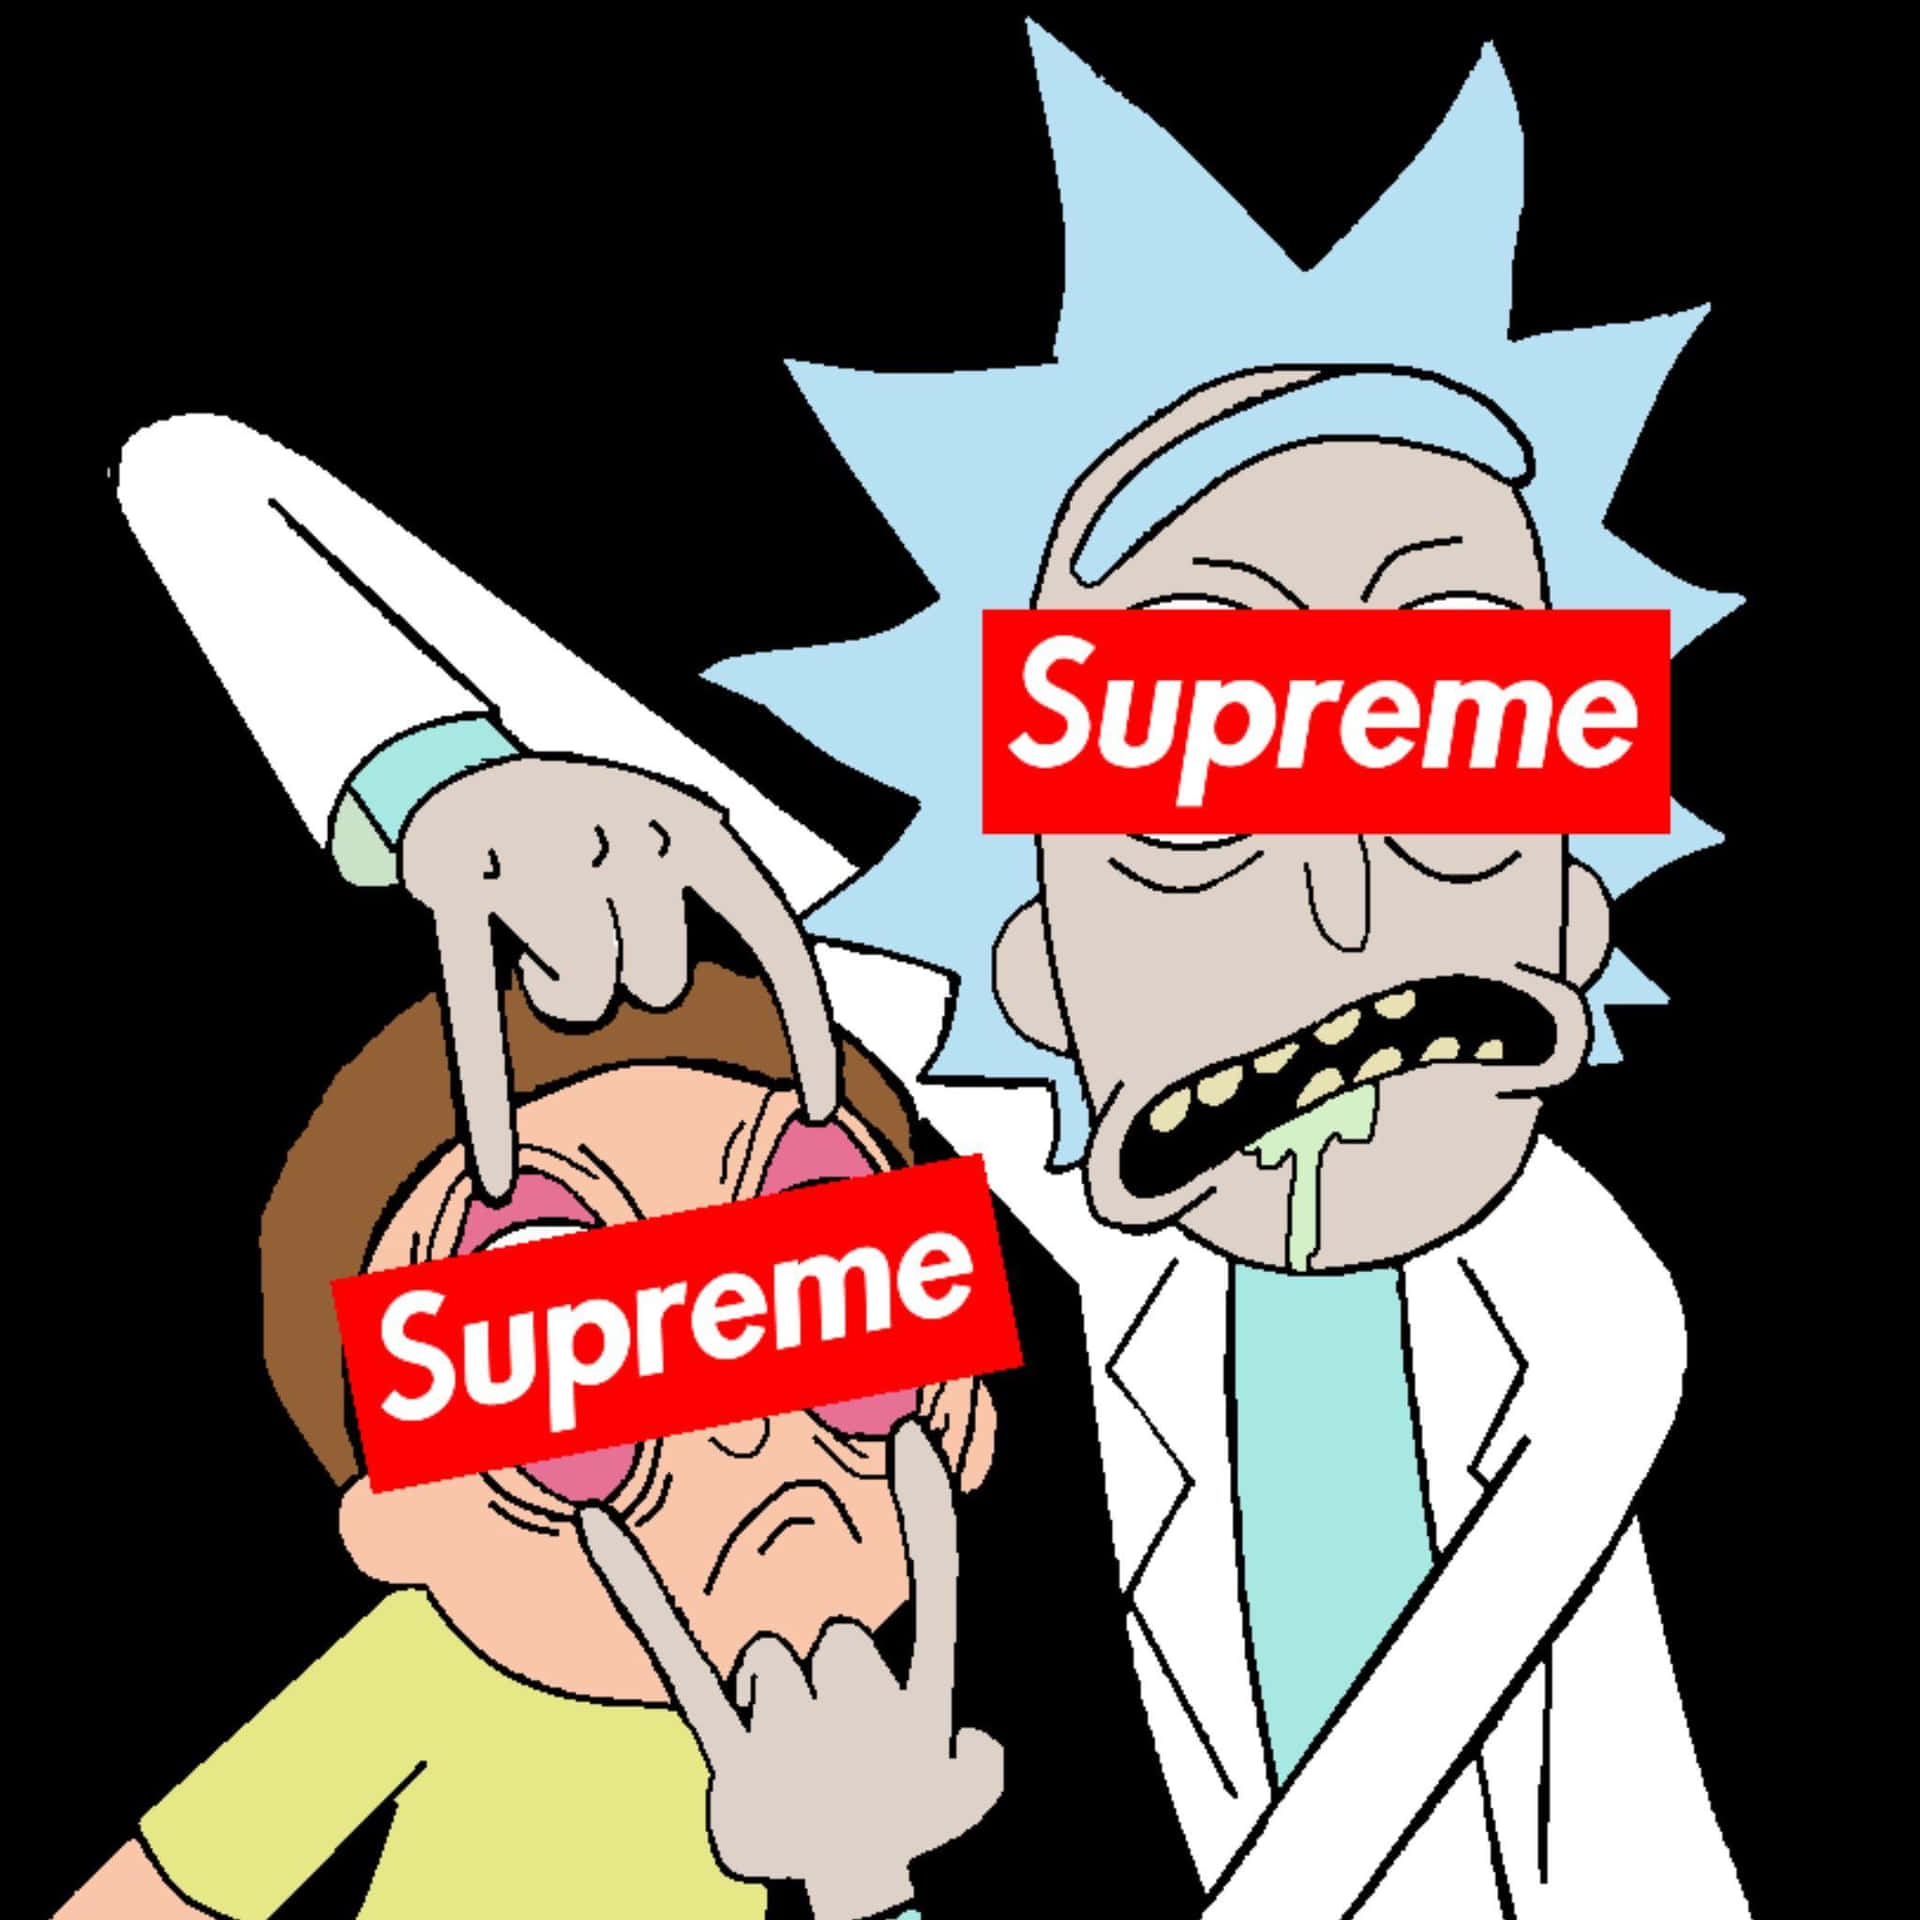 100+] Dope Supreme Wallpapers